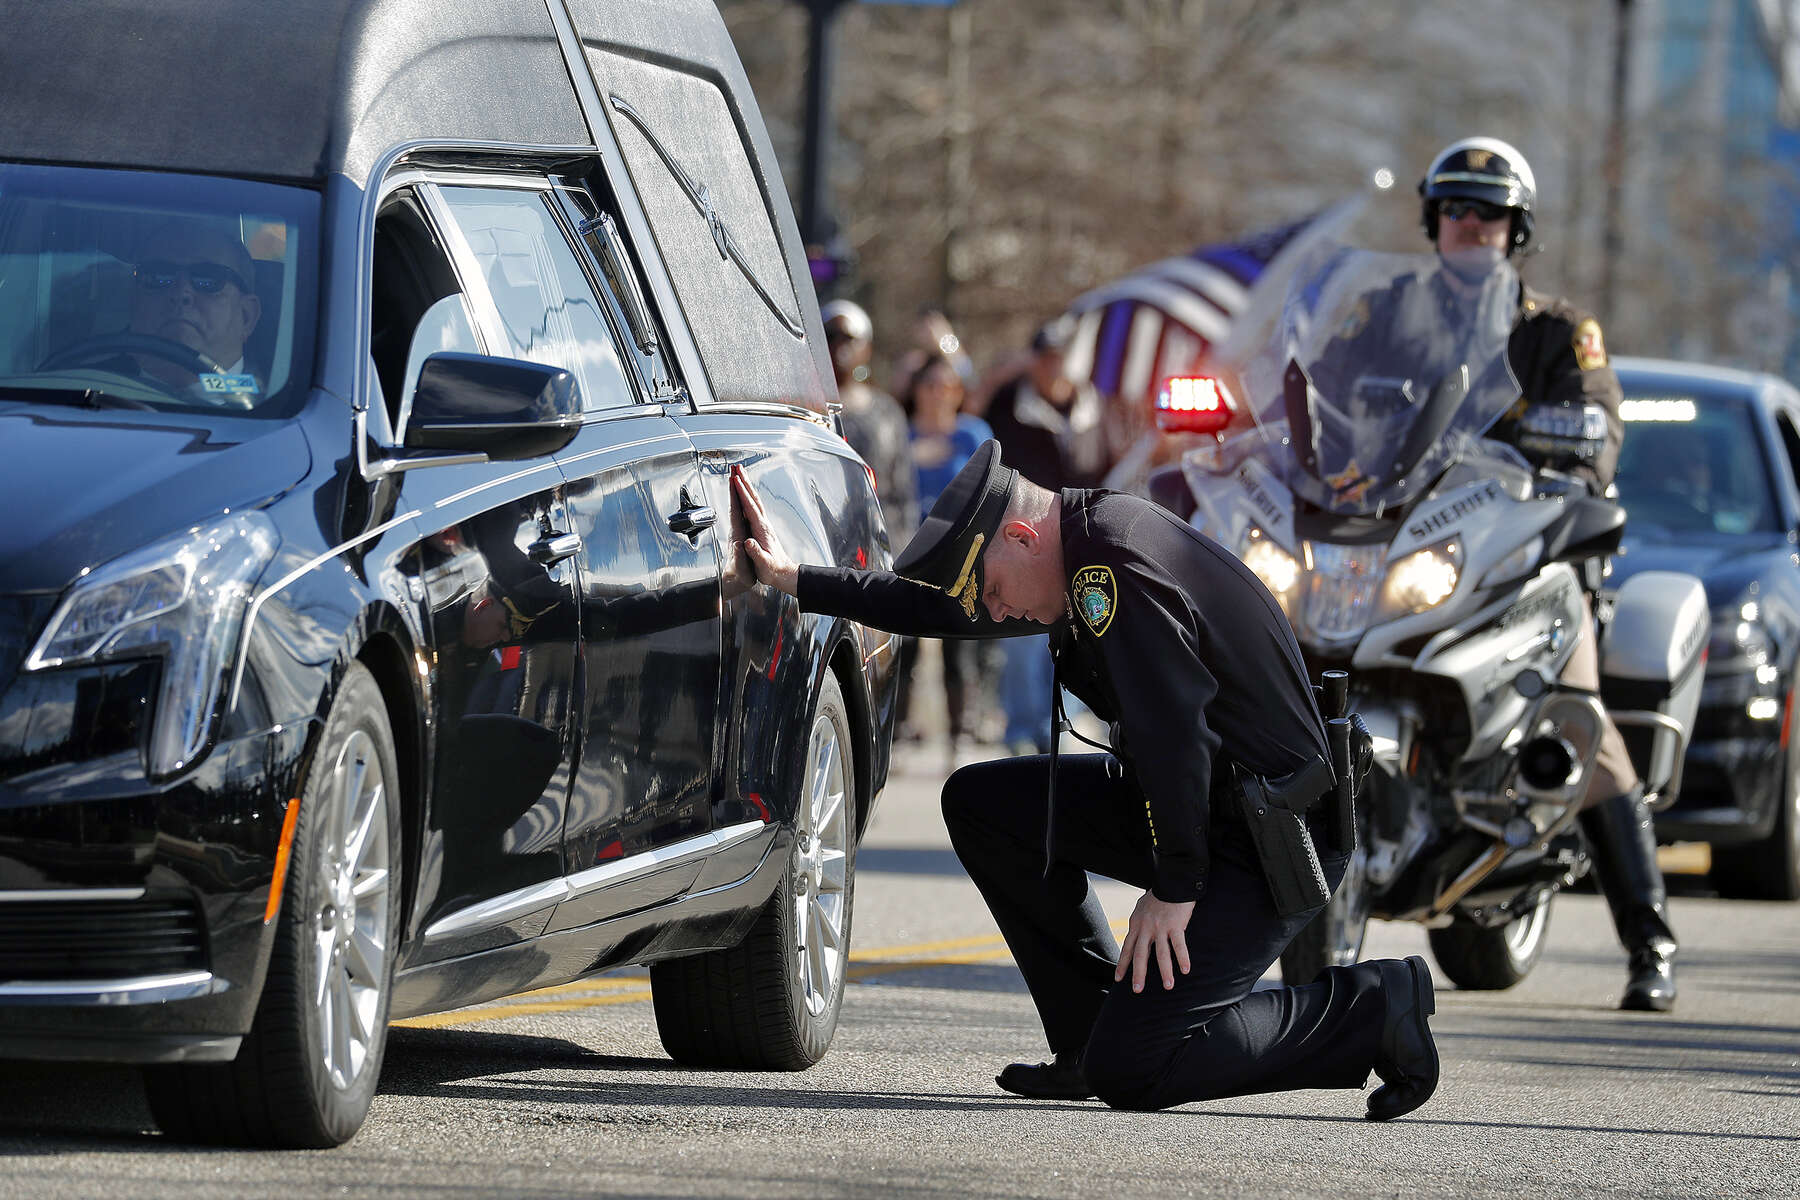 Newport News Police Chief Steve Drew falls to one knee and touches the hearse carrying officer Katherine Thyne outside of the Newport News Police Department South Precinct during a procession Saturday afternoon January 25, 2020. Officer Thyne died Thursday night after being dragged by the car of a man who she and another officer were questioning. On Saturday, the Newport News Police Department transported officer Katherine Thyne from the Medical Examiner’s Office in Norfolk to Altmeyer Funeral Home in Newport News.